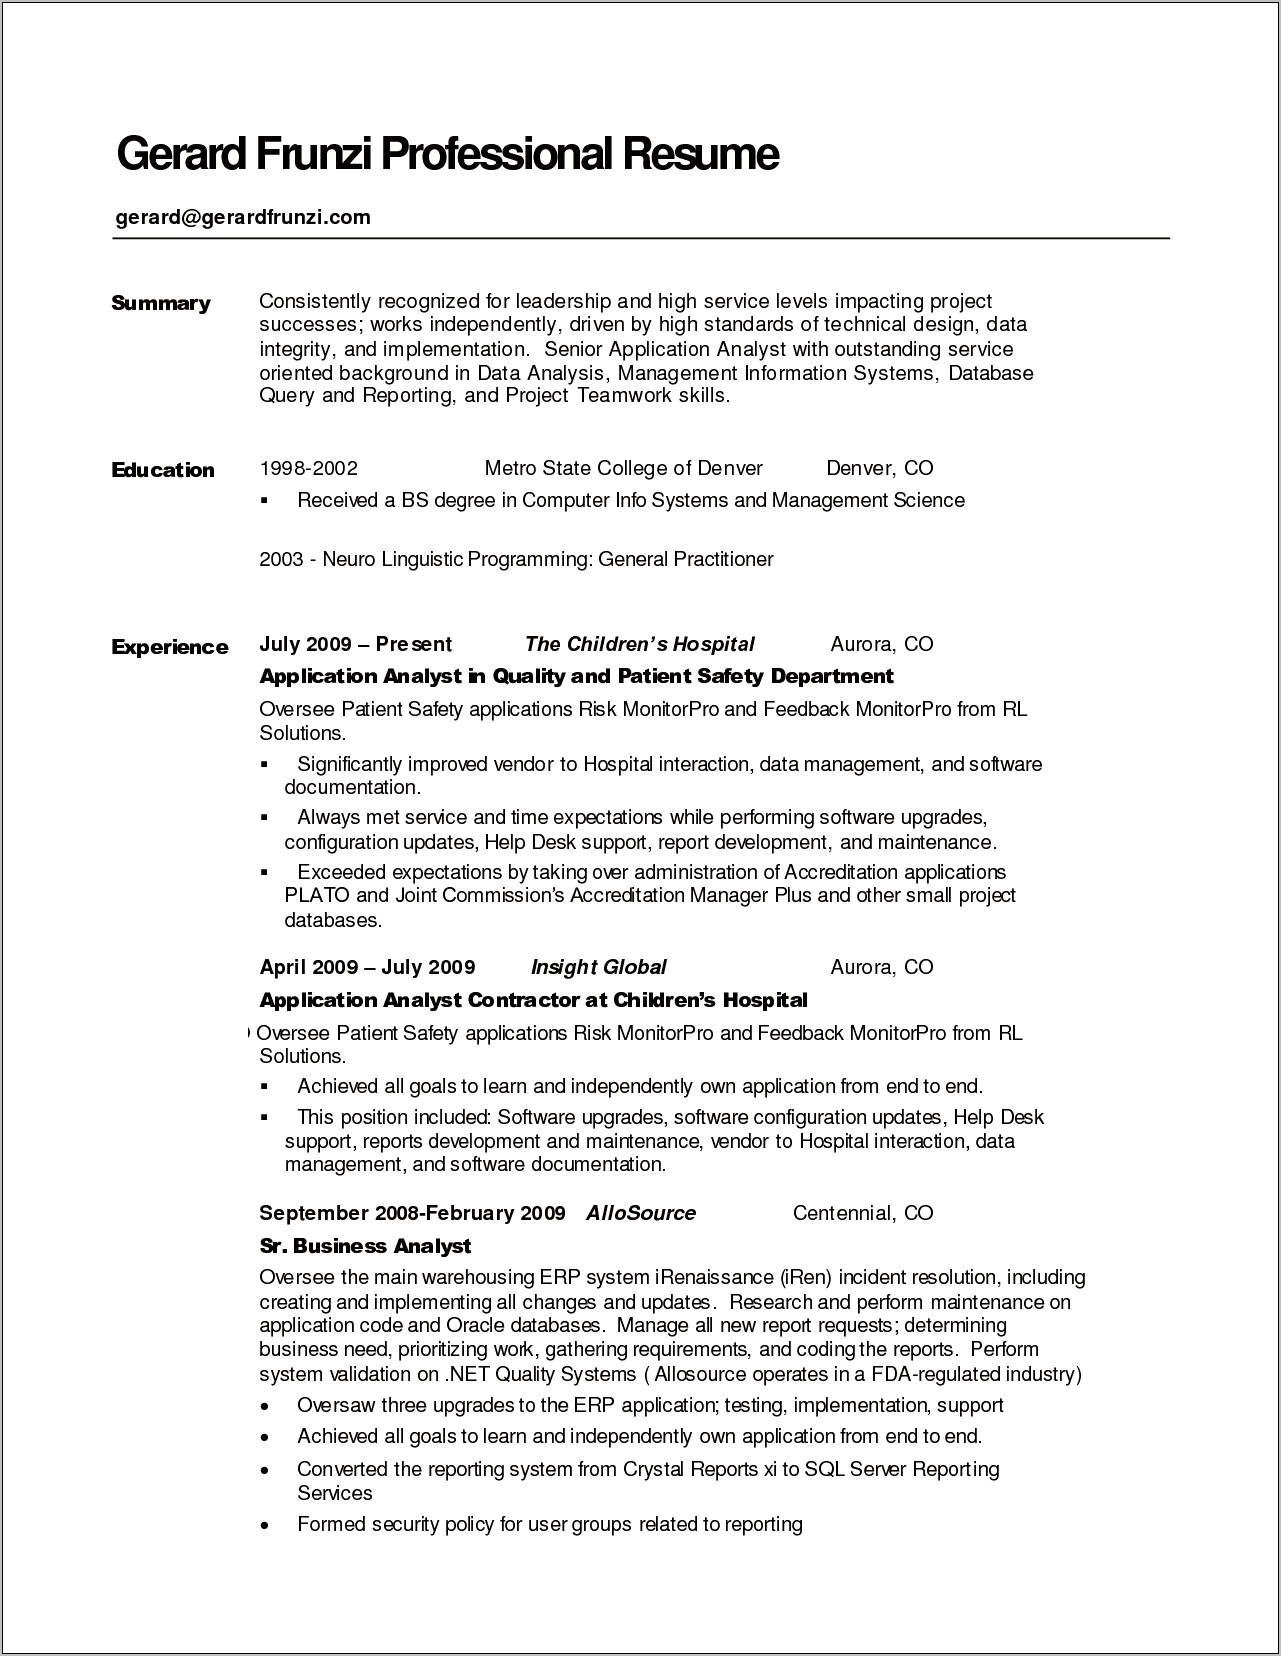 A Short Professional Summary For Resume